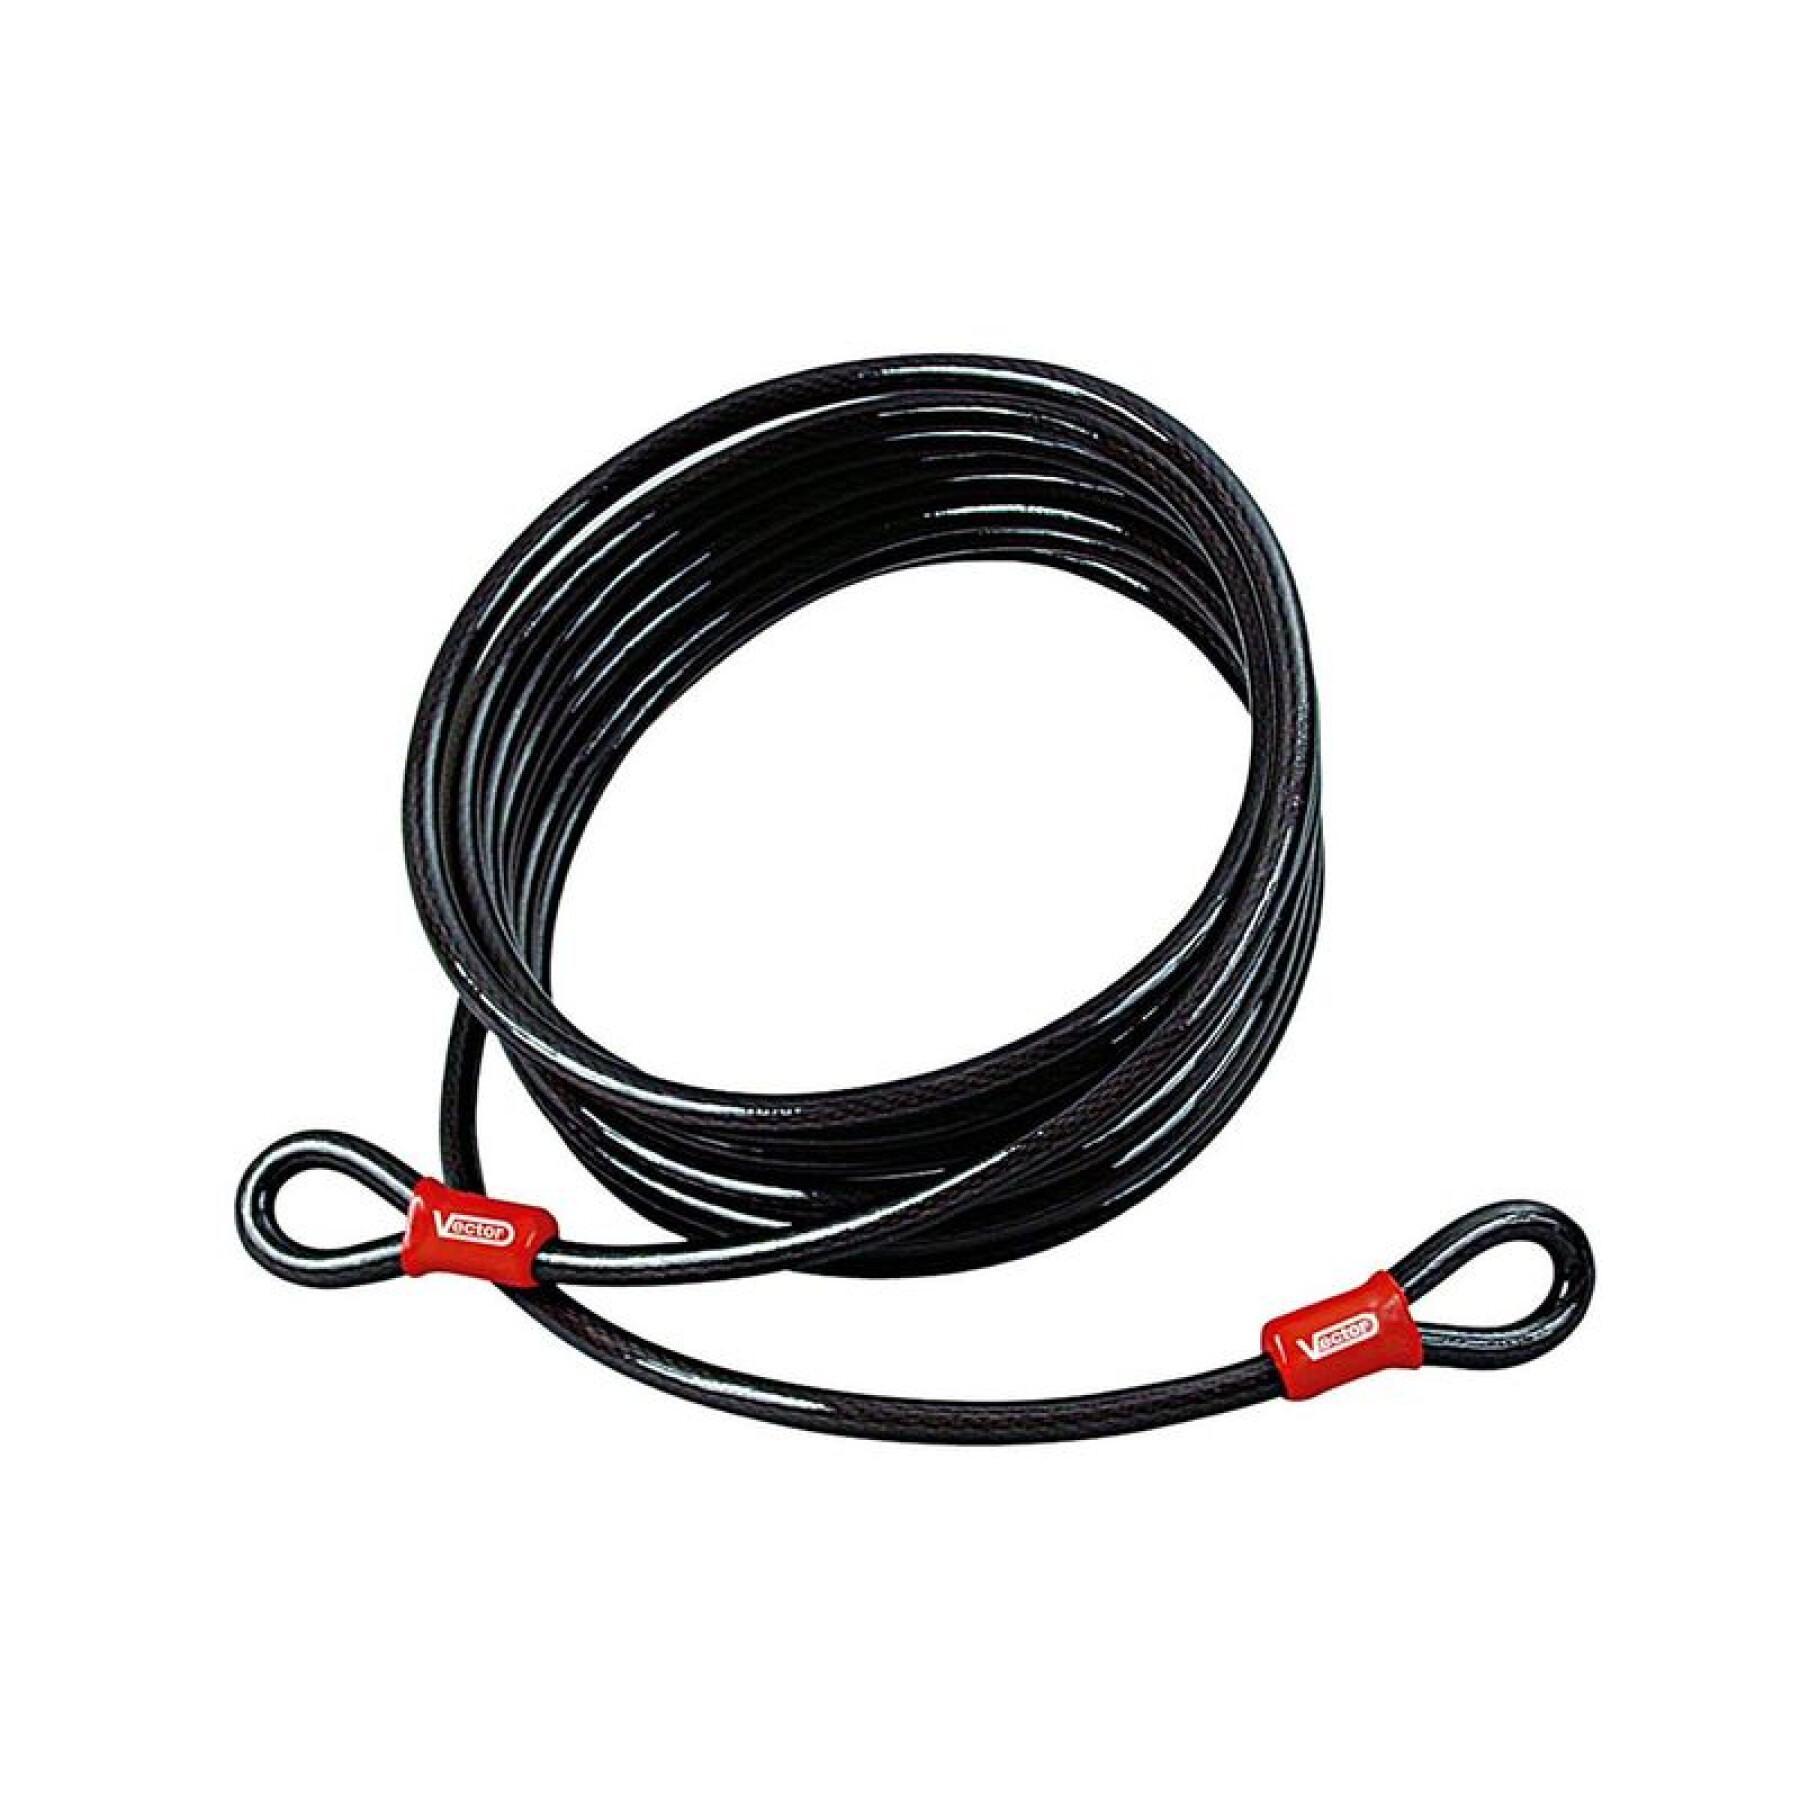 Cable anti-theft vector maxpro 18mm/9m Vector security